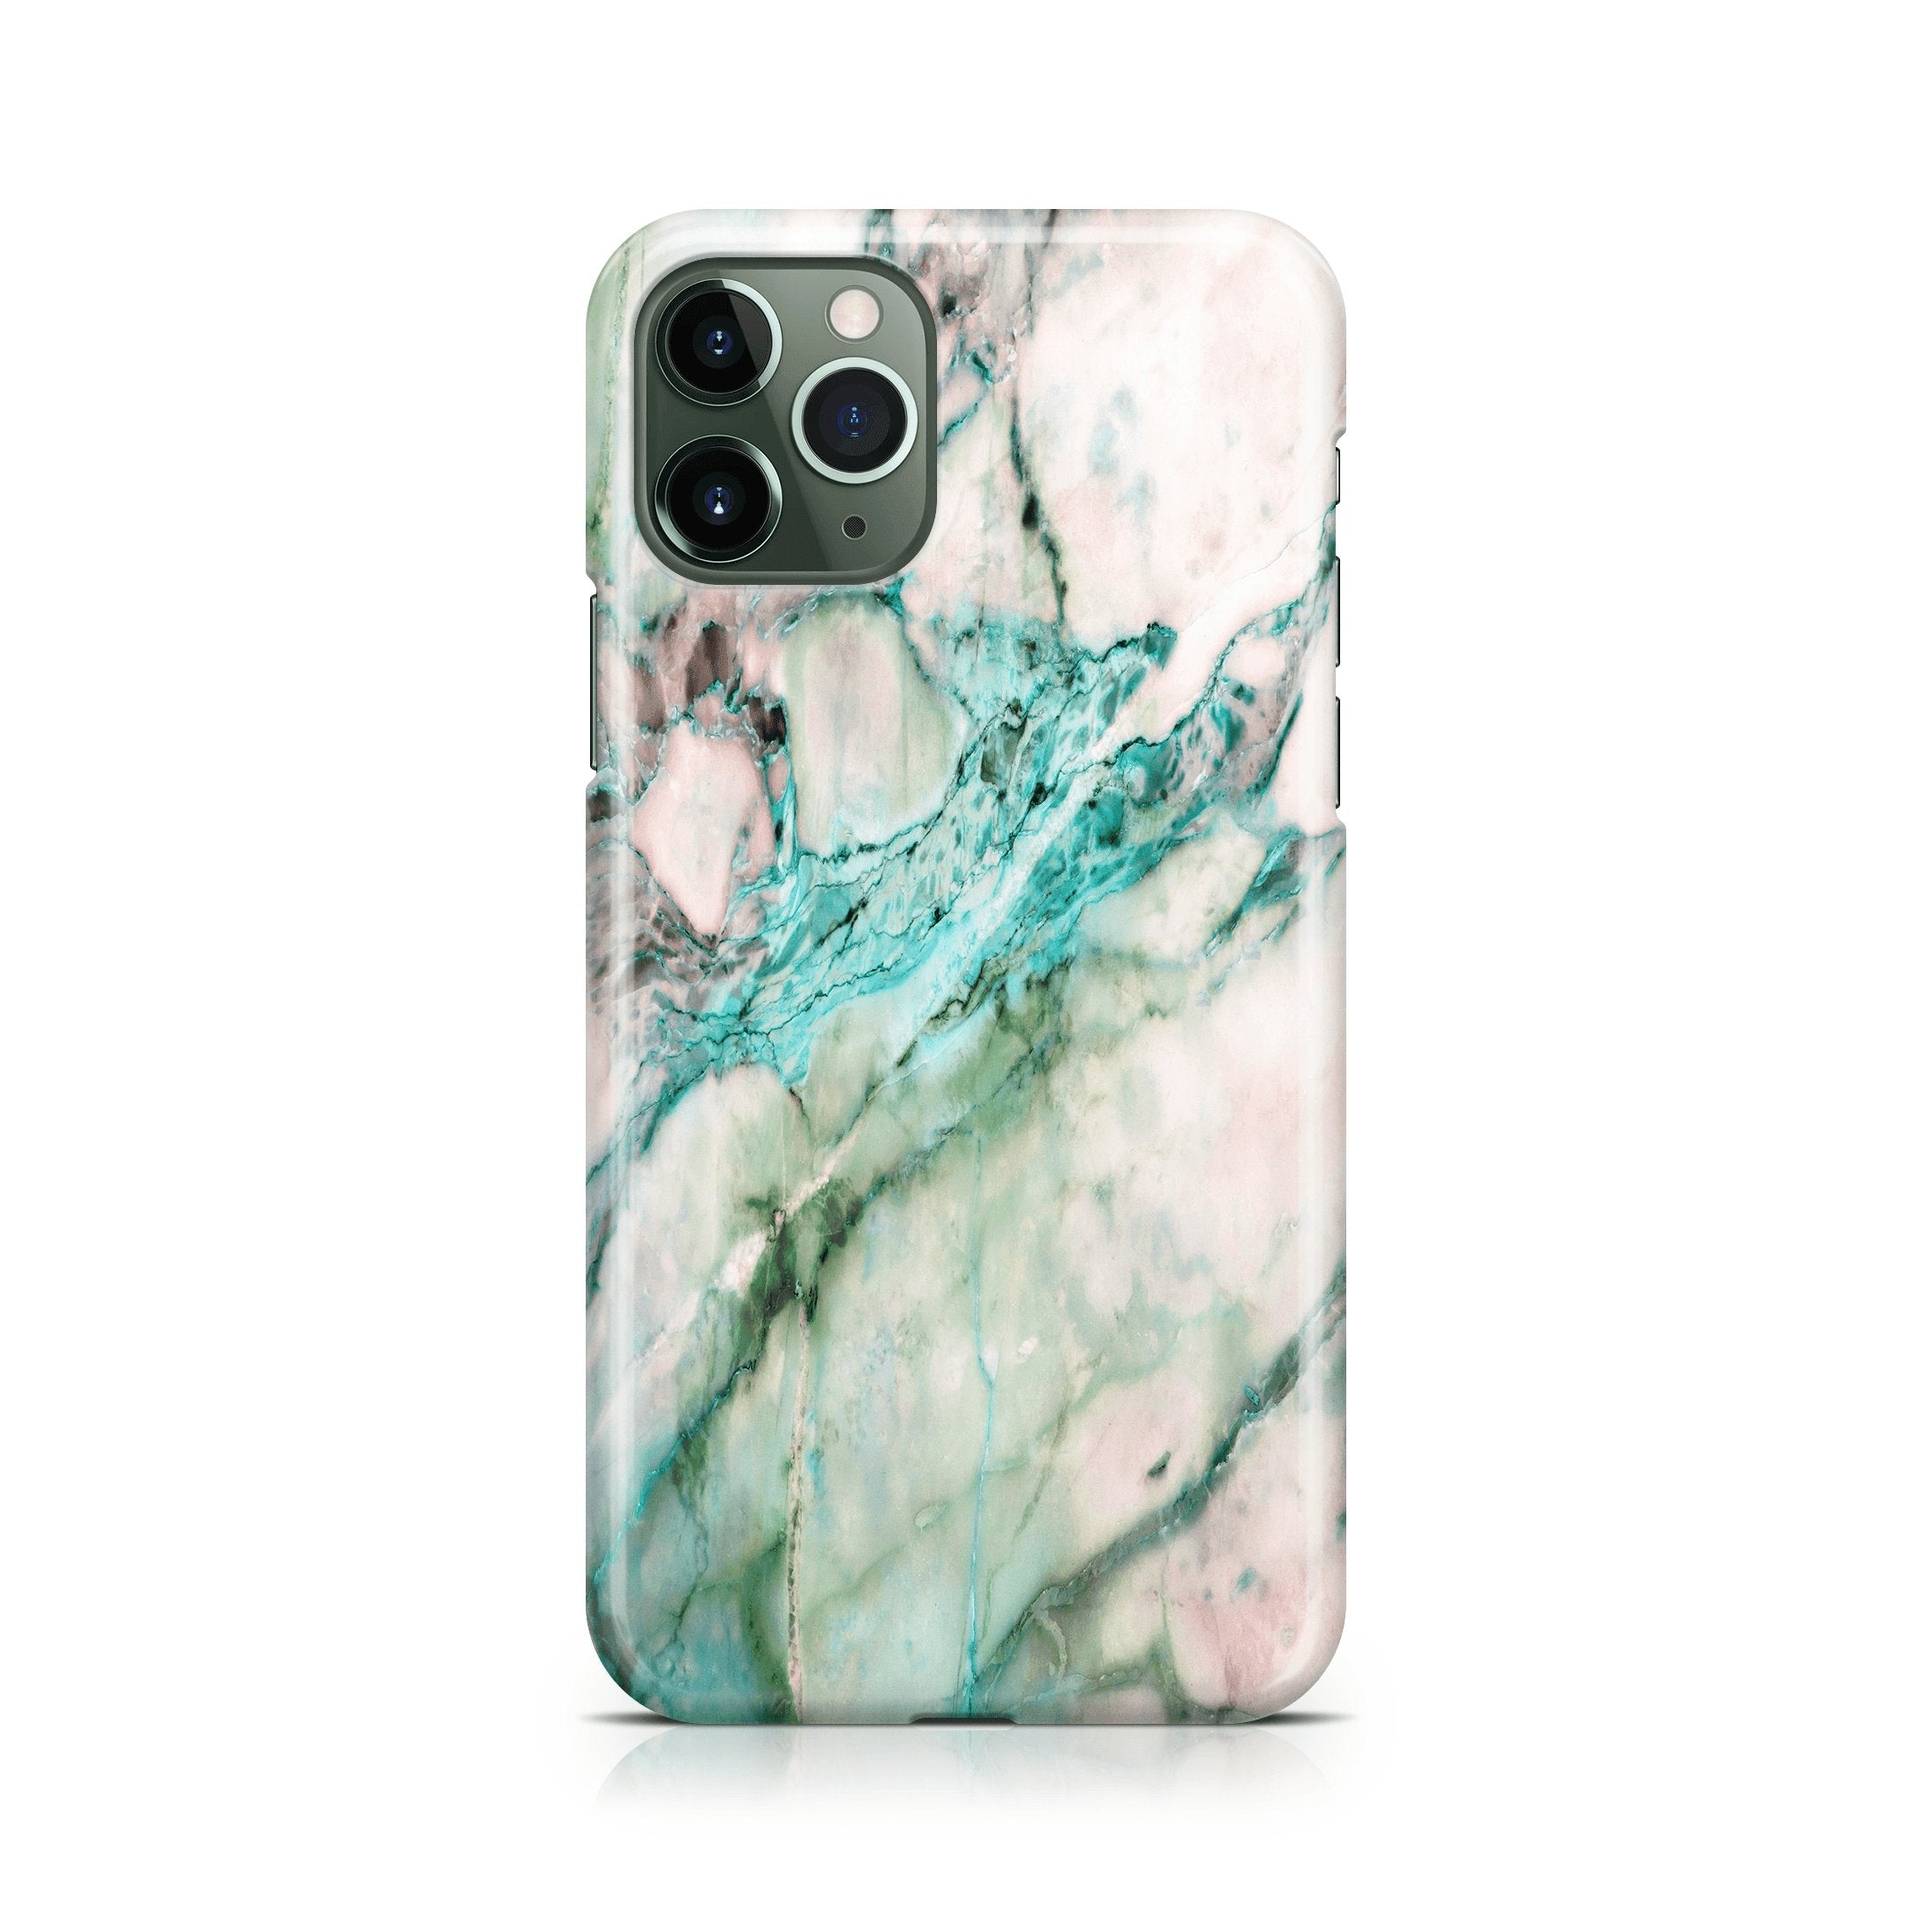 Turquoise Marble - iPhone phone case designs by CaseSwagger